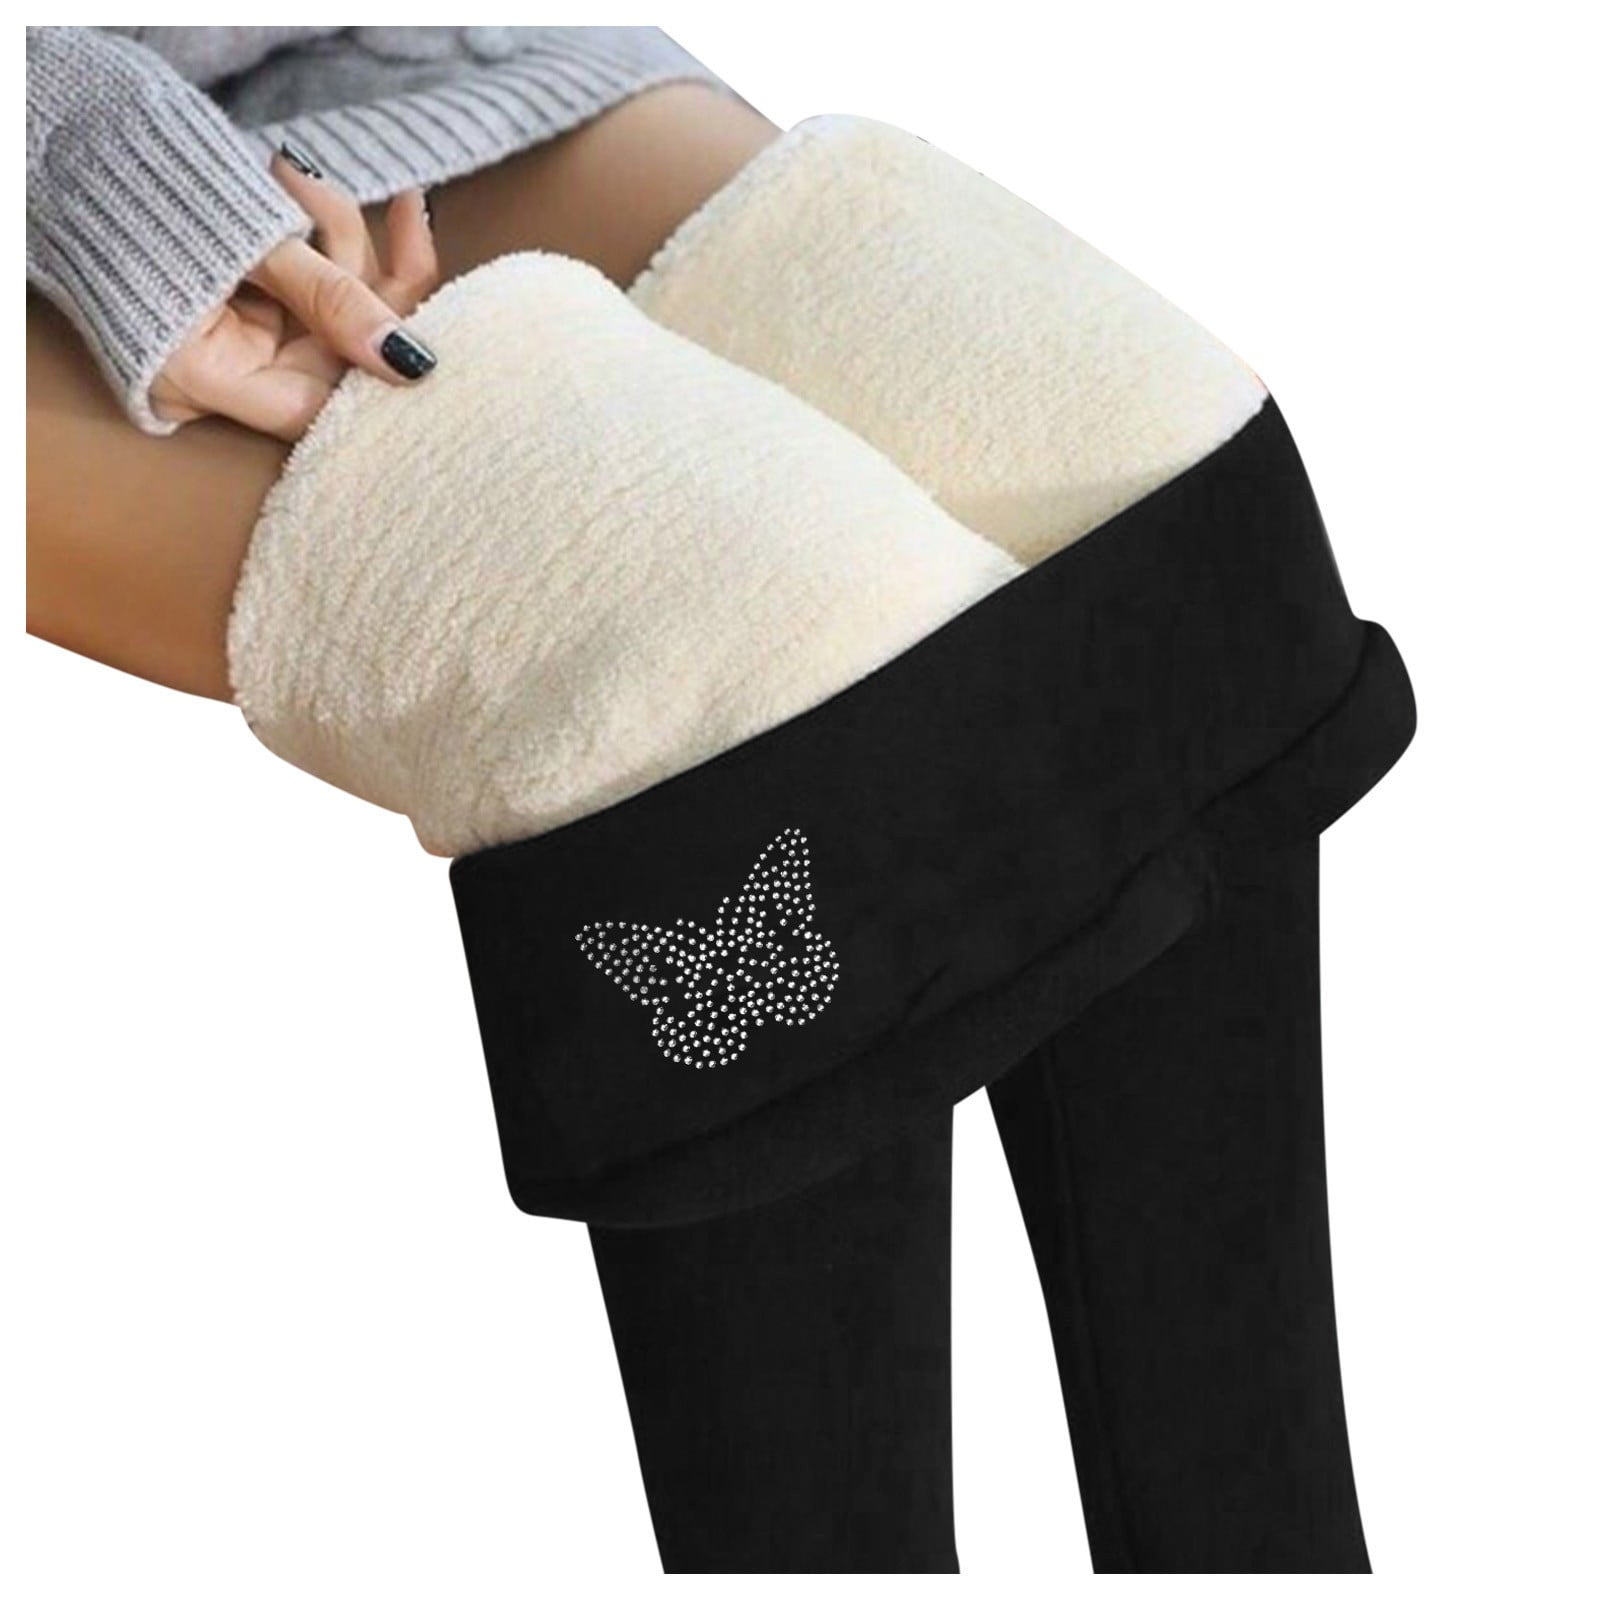 Women's Fleece Lined Water Resistant Legging High Waisted Thermal ...